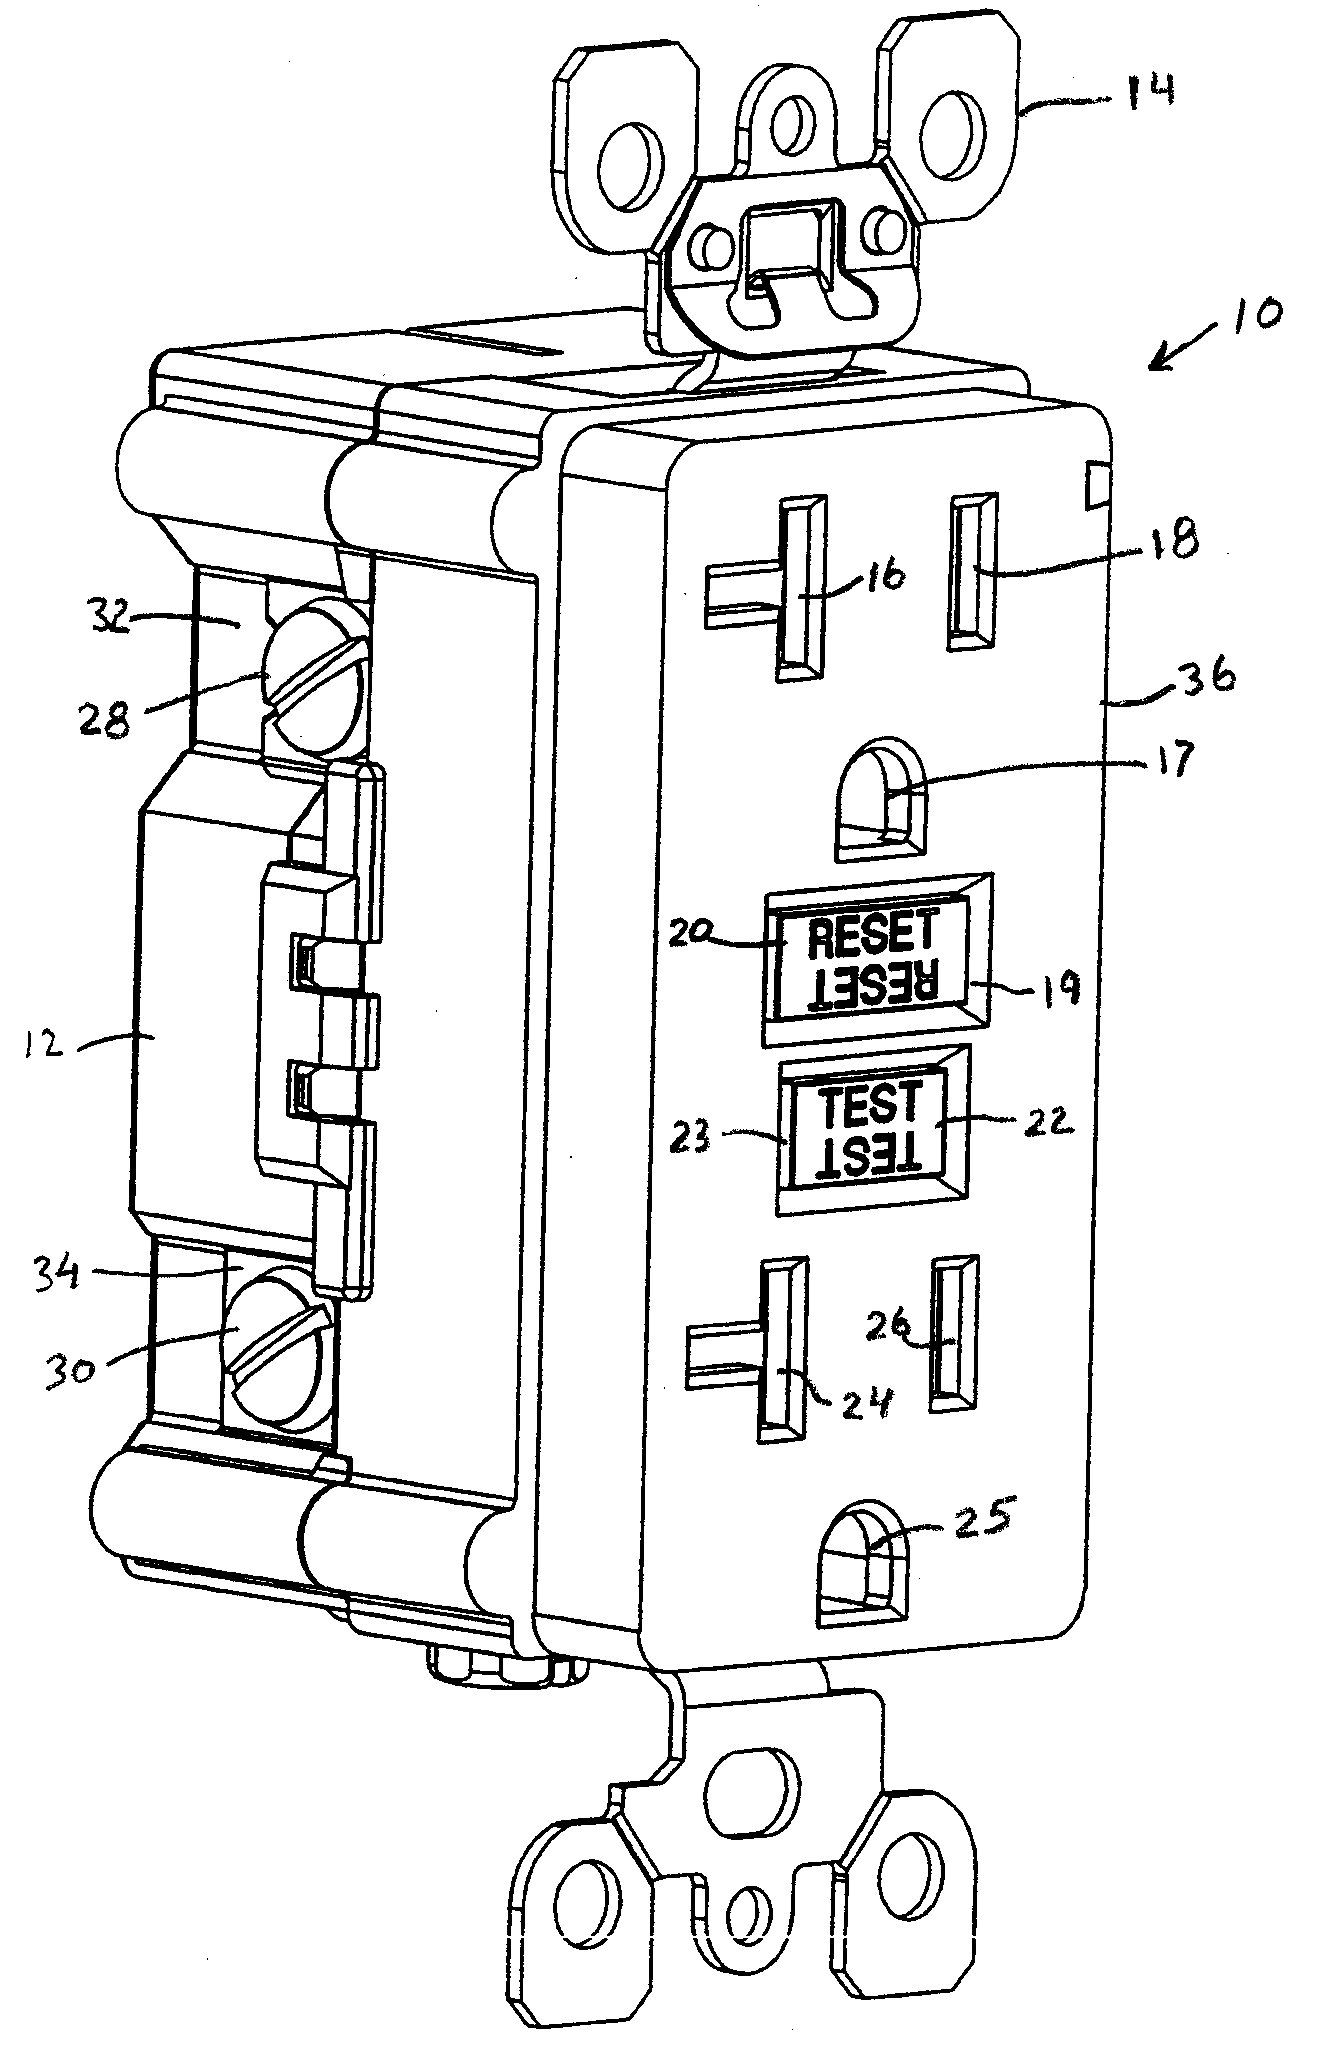 Tamper resistant ground fault circuit interrupter receptacle having dual function shutters